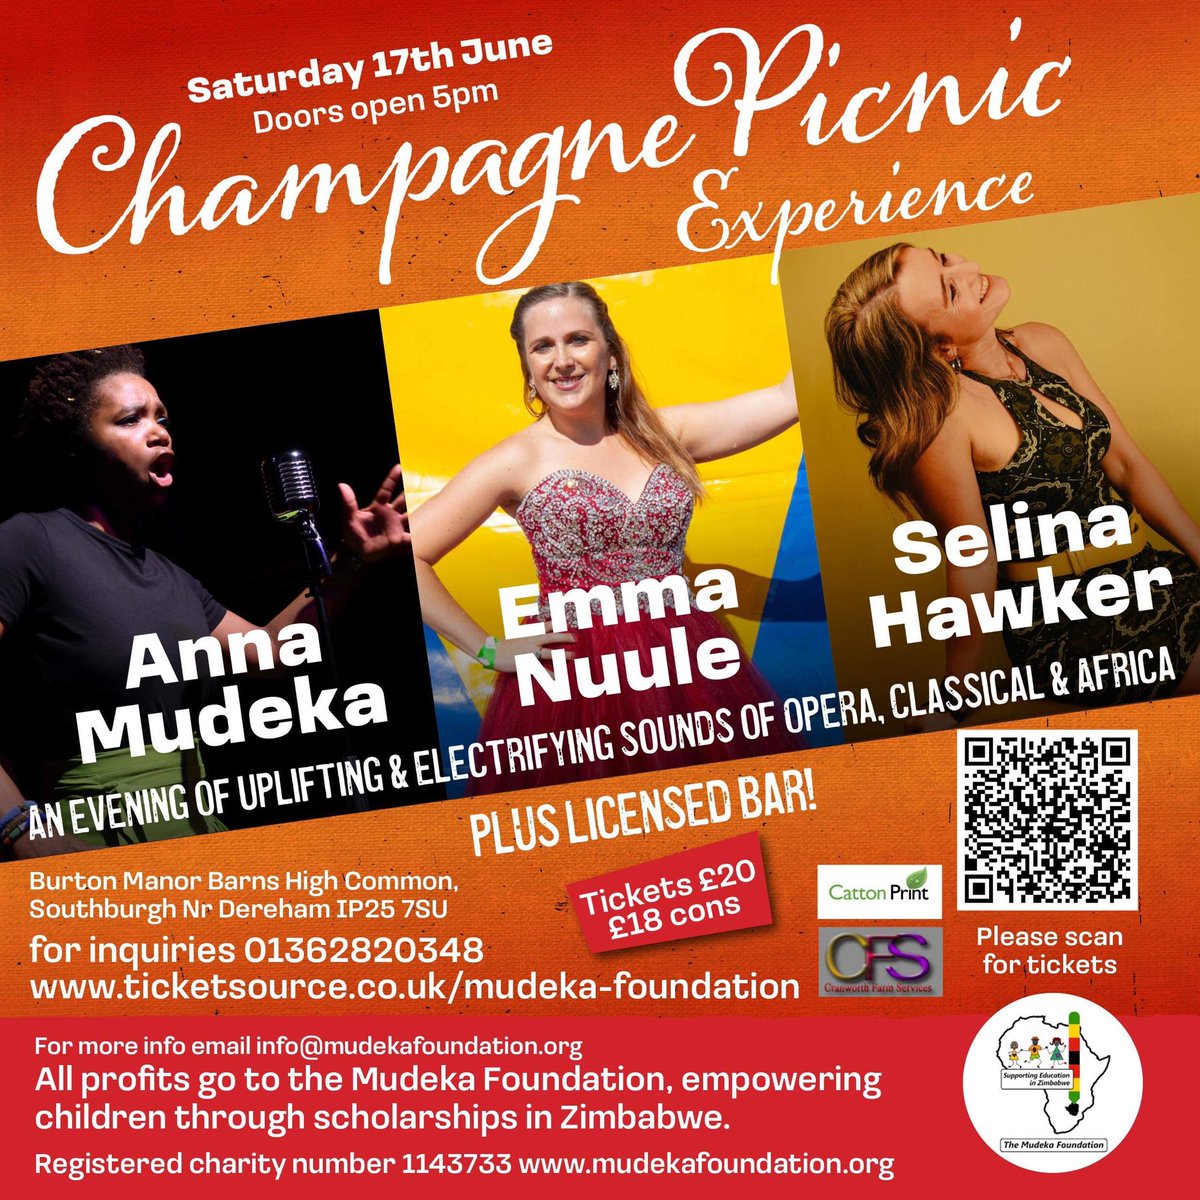 Looking forward to performing in this beautiful open air concert in a week with the wonderful @annamudeka Champagne and beautiful music…what a nice way to spend a weekend! Come say hi! . #concerts #ClassicalMusic #livemusic #Norfolk #Countryside #Norwich #Suffolk #June2023